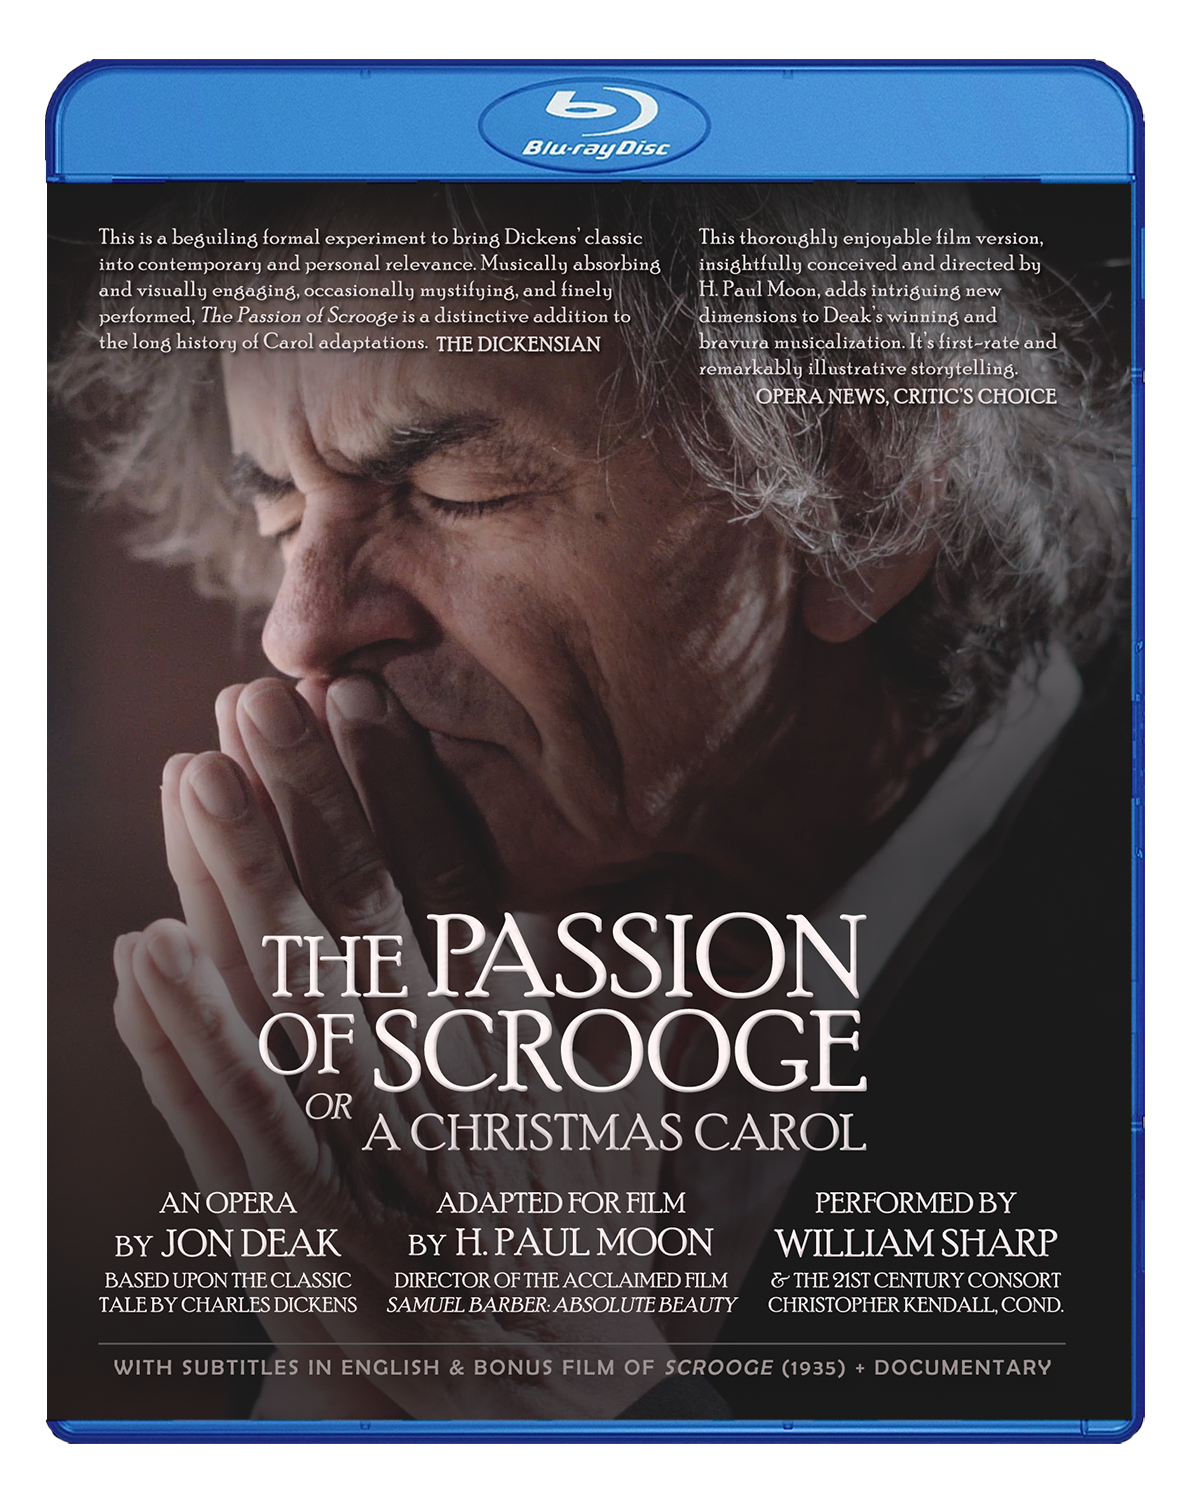 The Passion of Scrooge (Blu-ray)